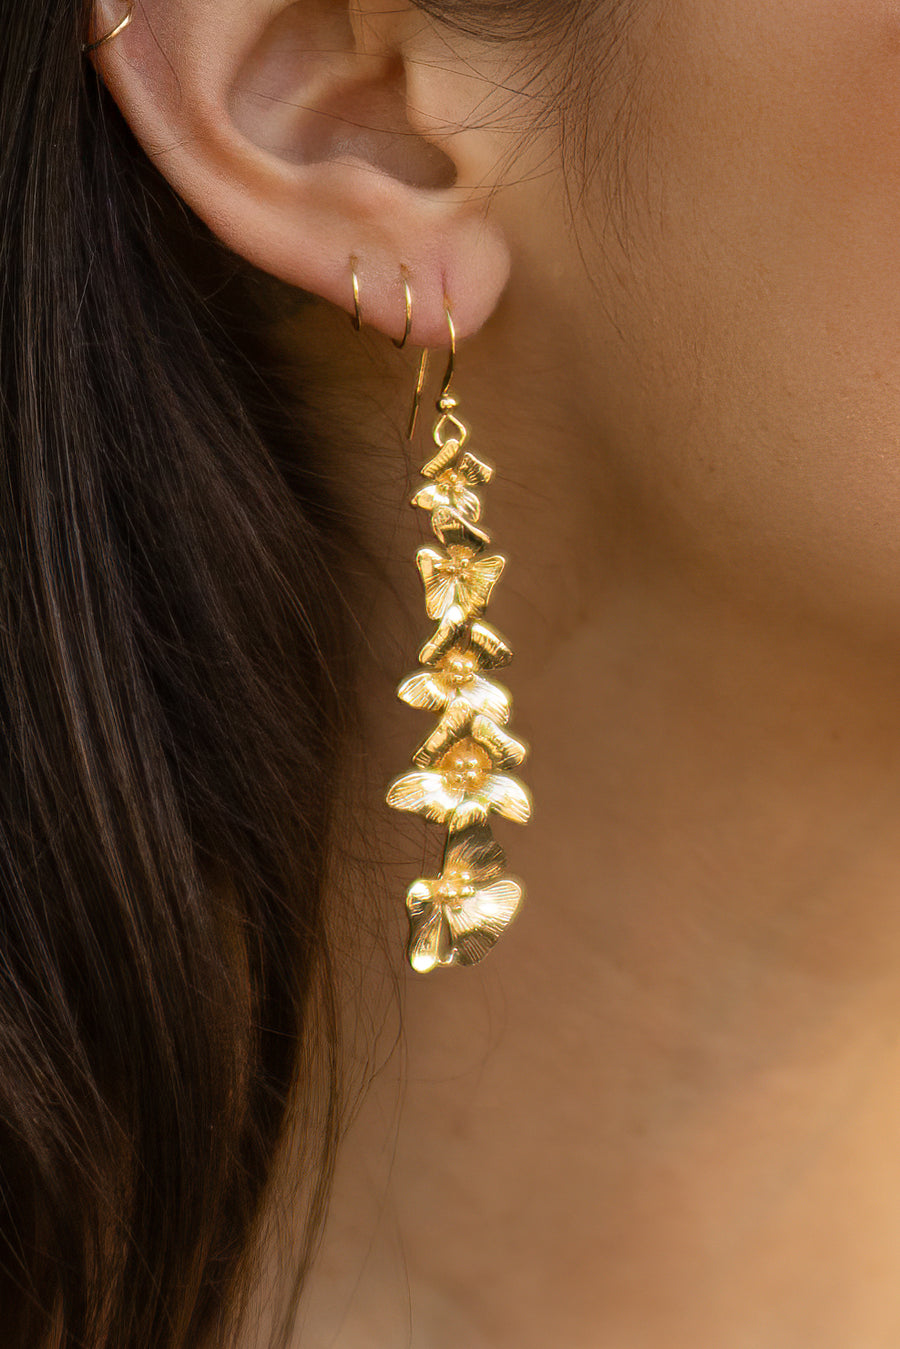 Conservatory Earrings